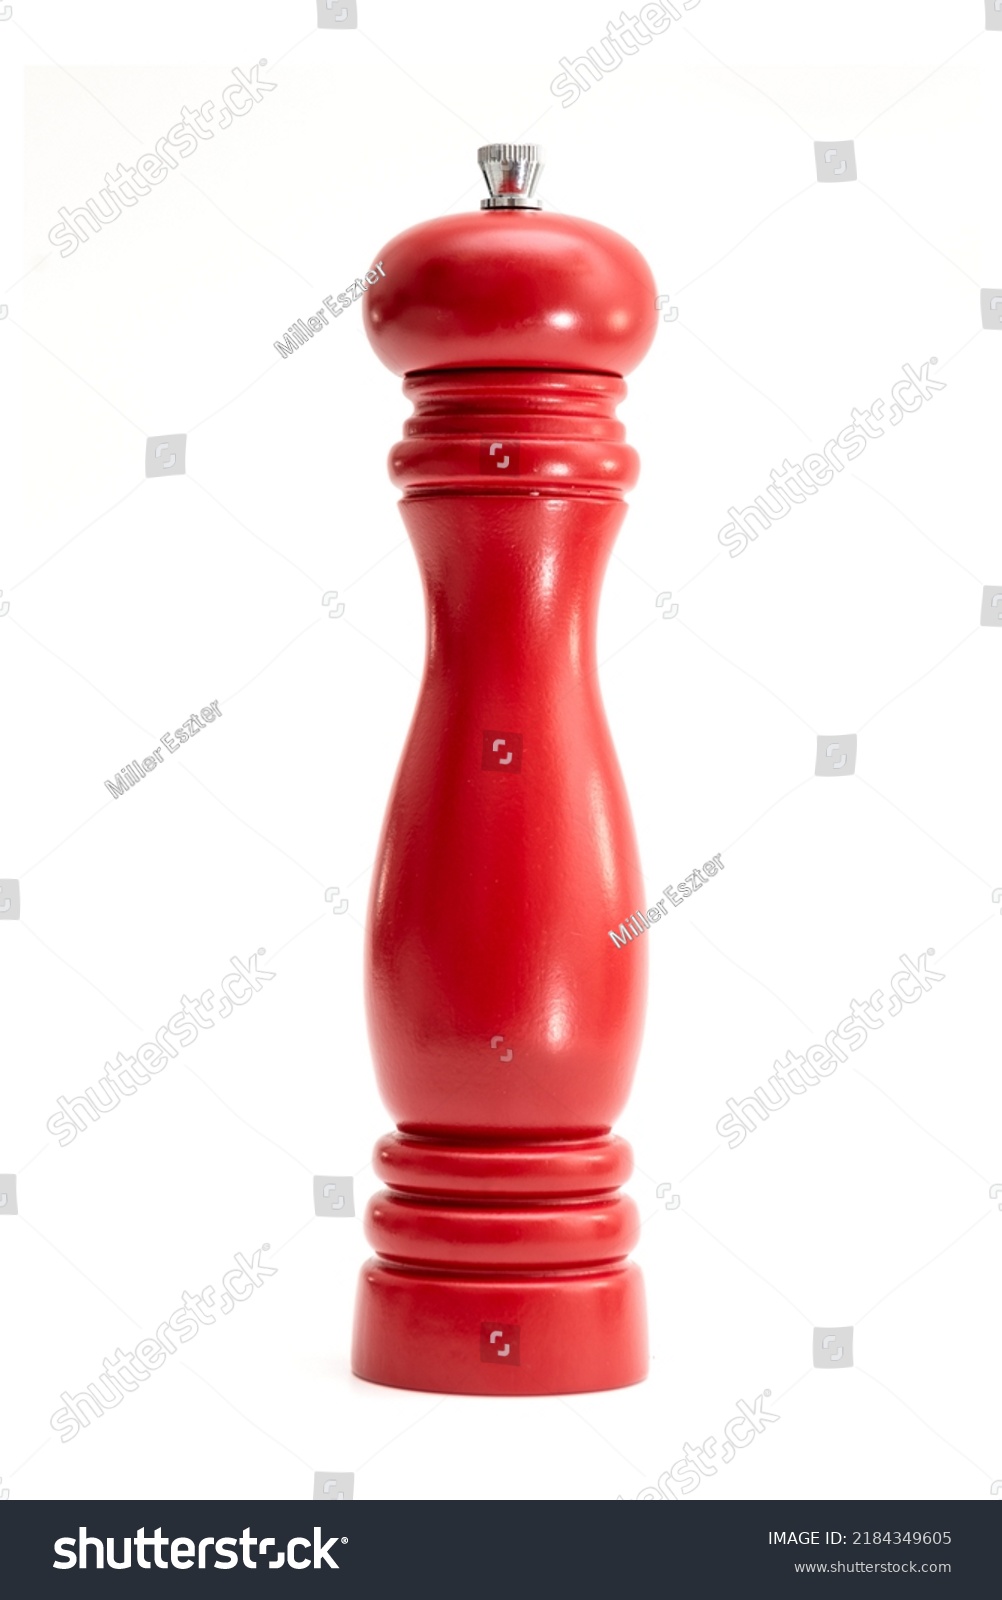 Wooden pepper or salt mill isolated on white background. #2184349605